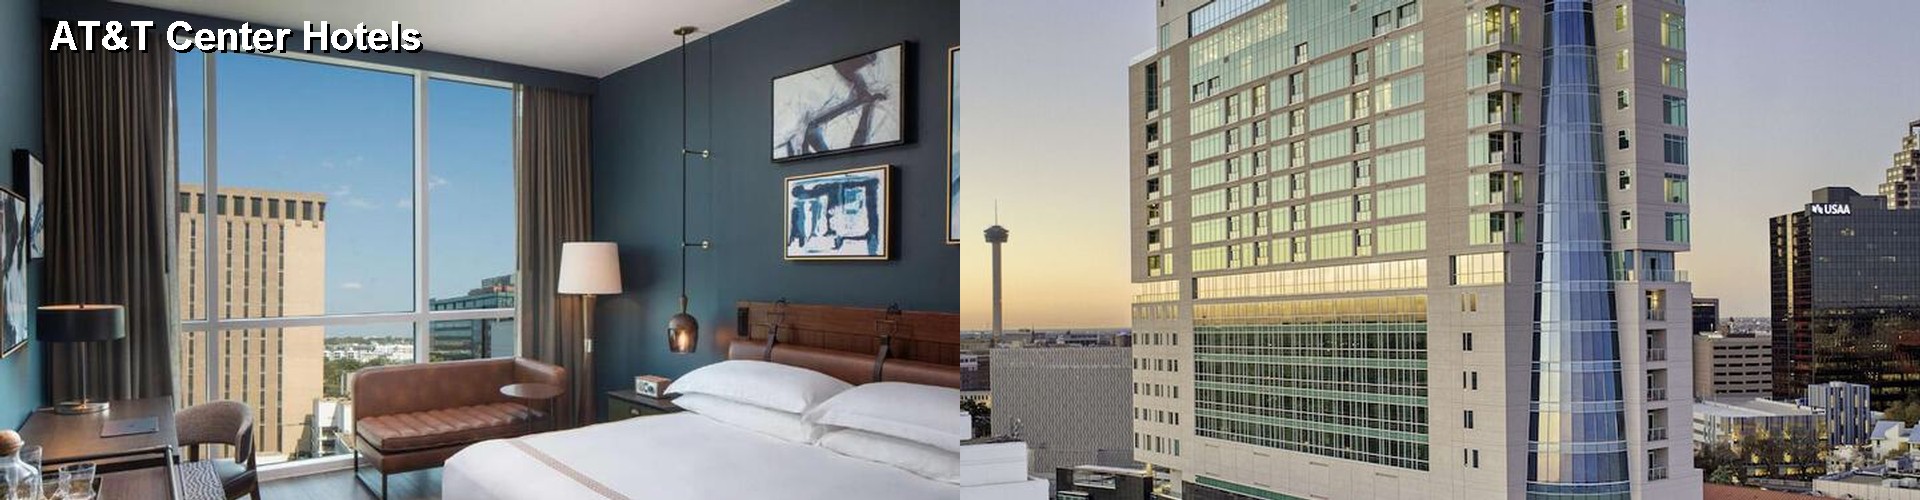 5 Best Hotels near AT&T Center